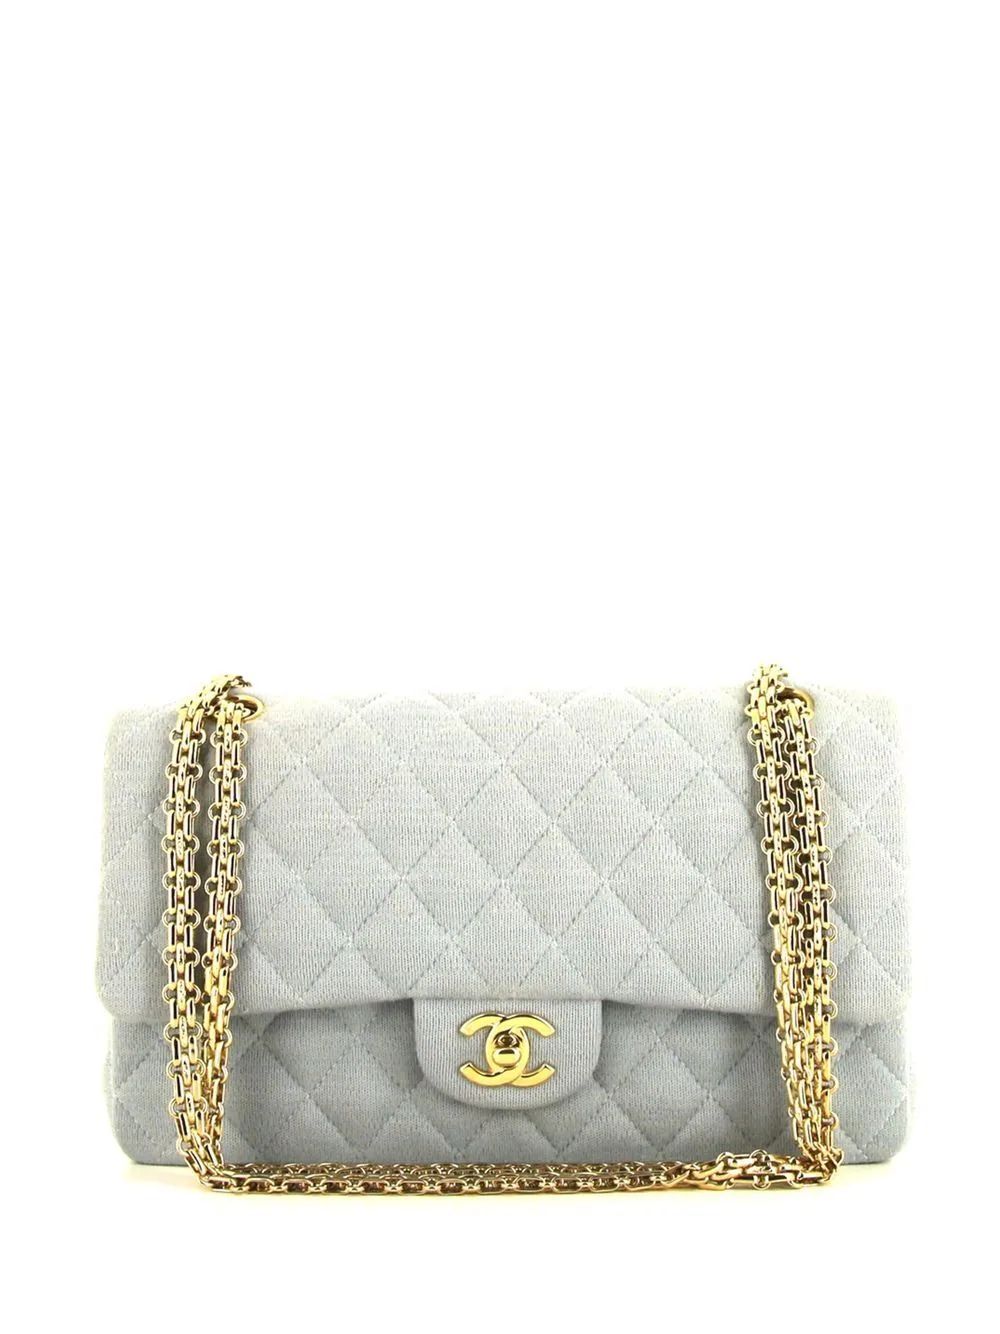 CHANEL Pre-Owned 2003 Timeless Schultertasche - Farfetch | Farfetch Global